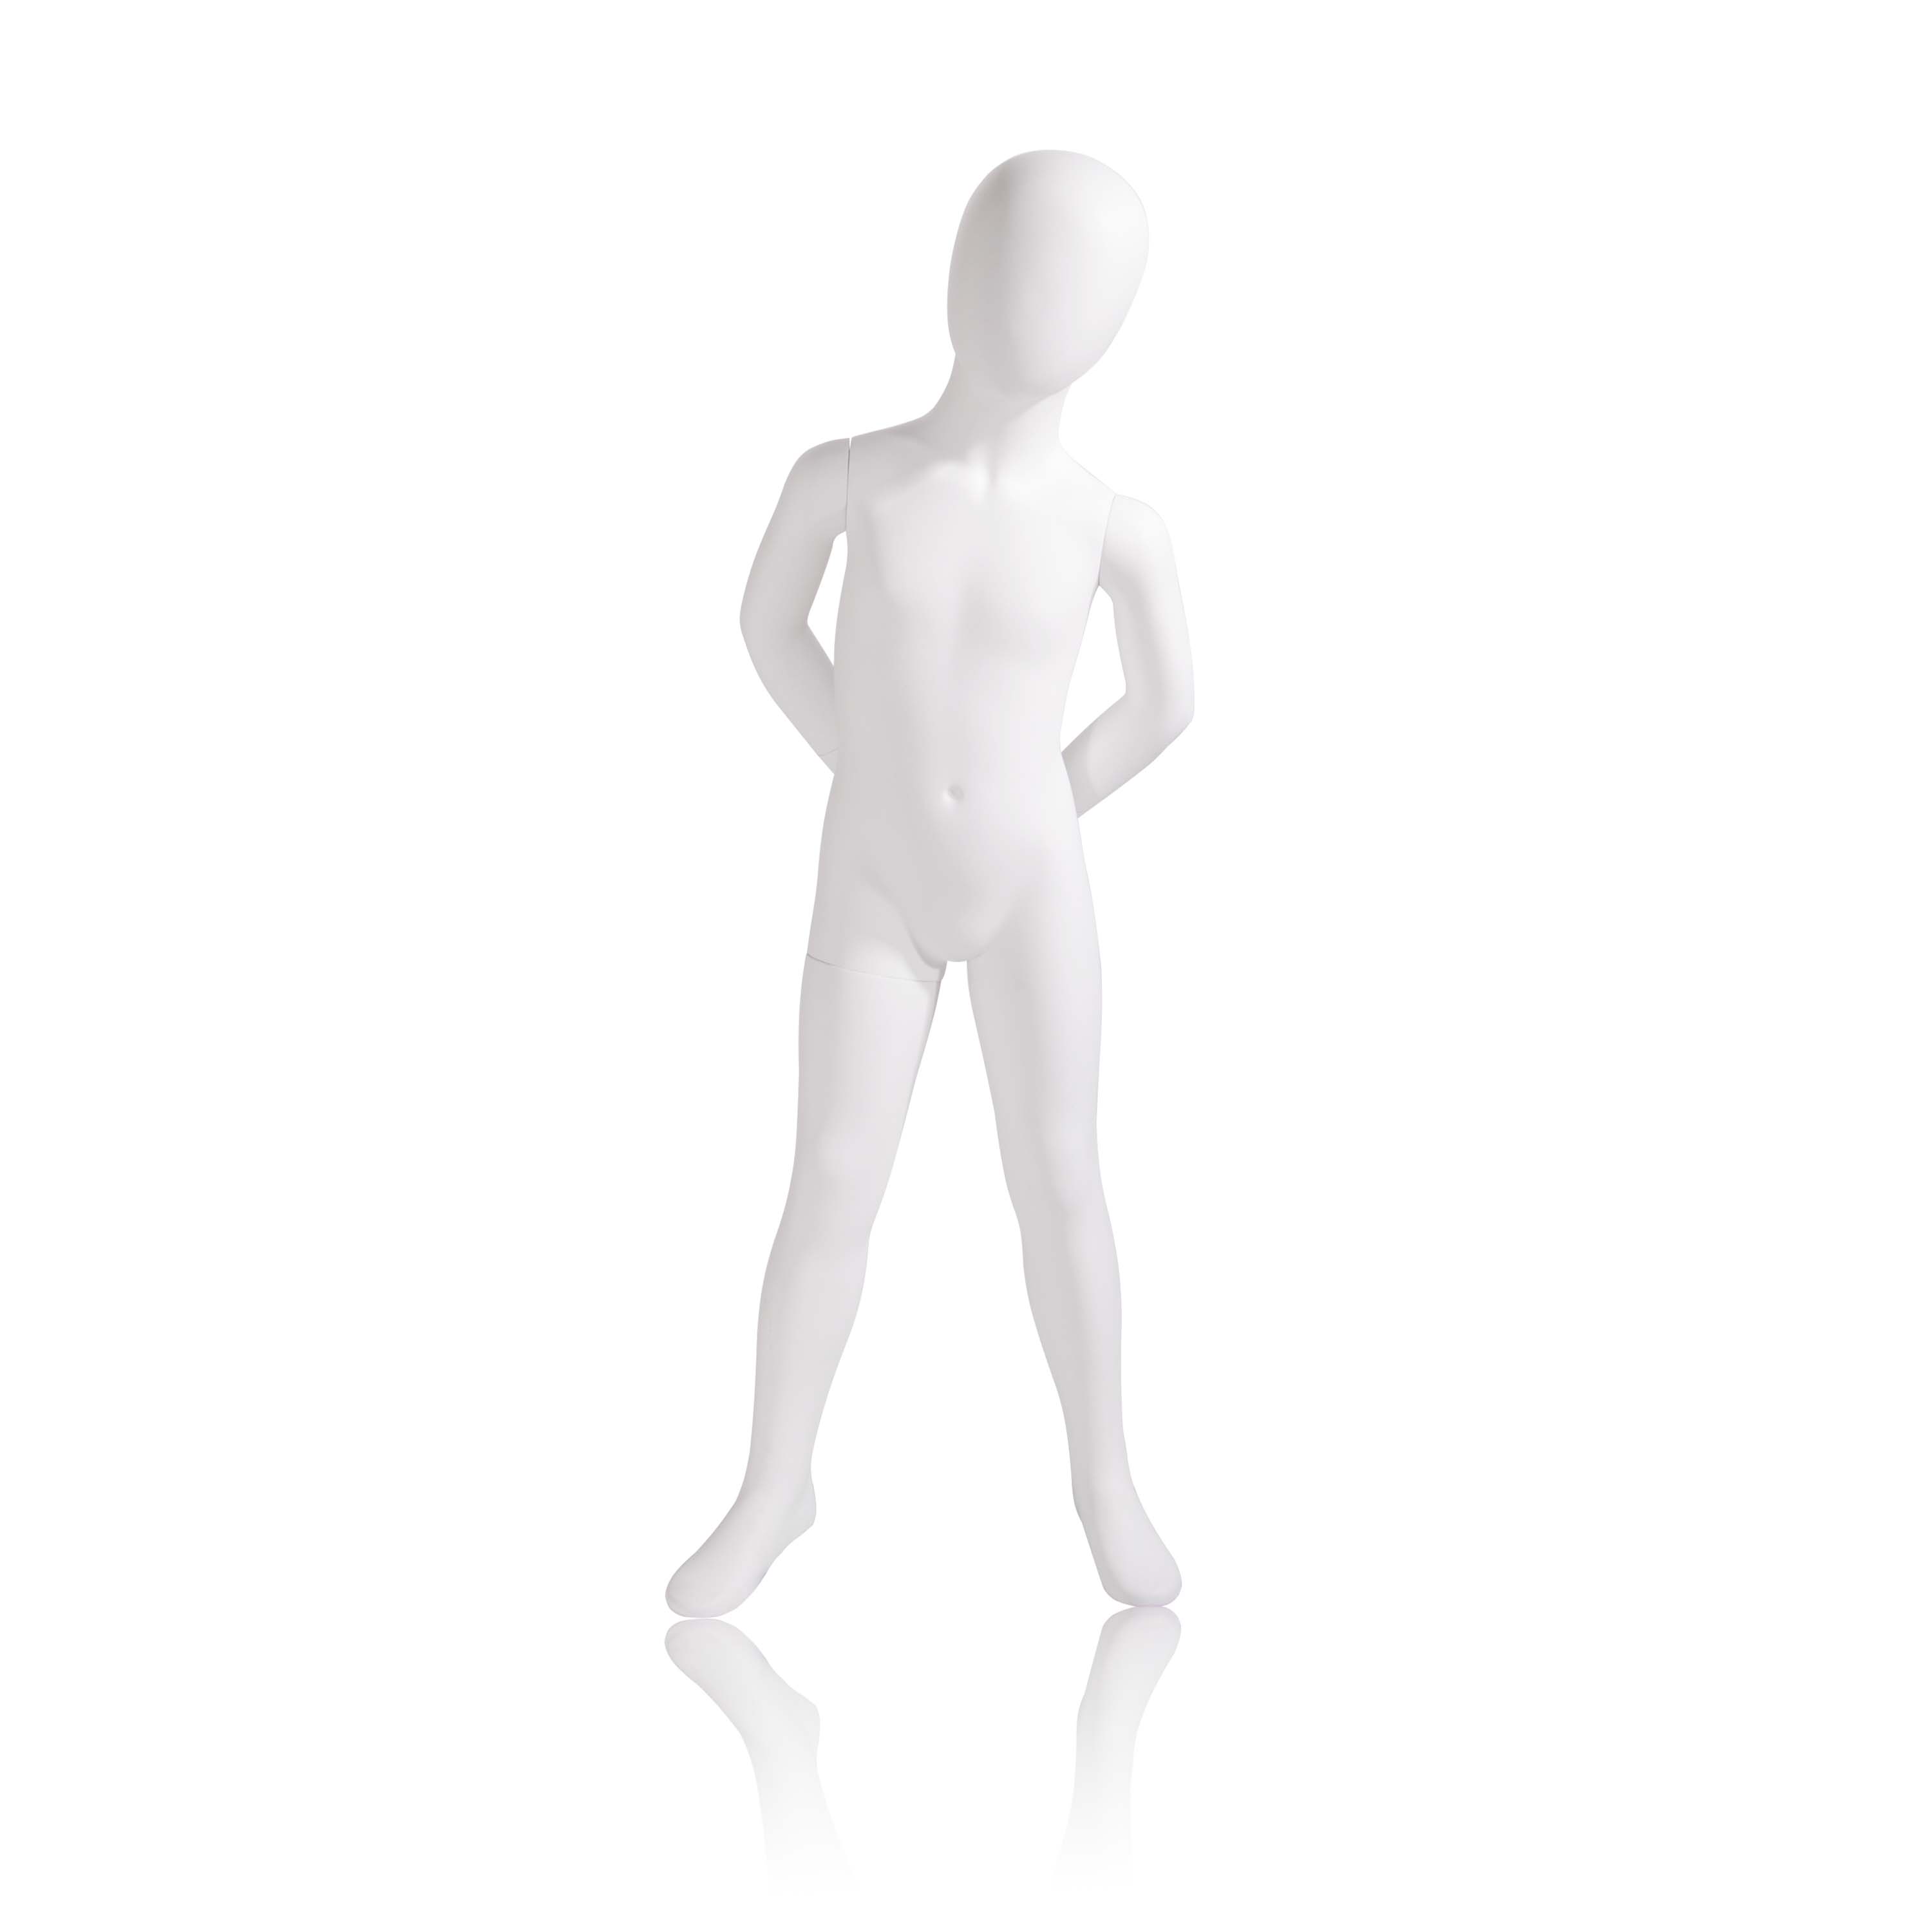 Female Egg Head Mannequin - Standing With Arms Behind Back Pose